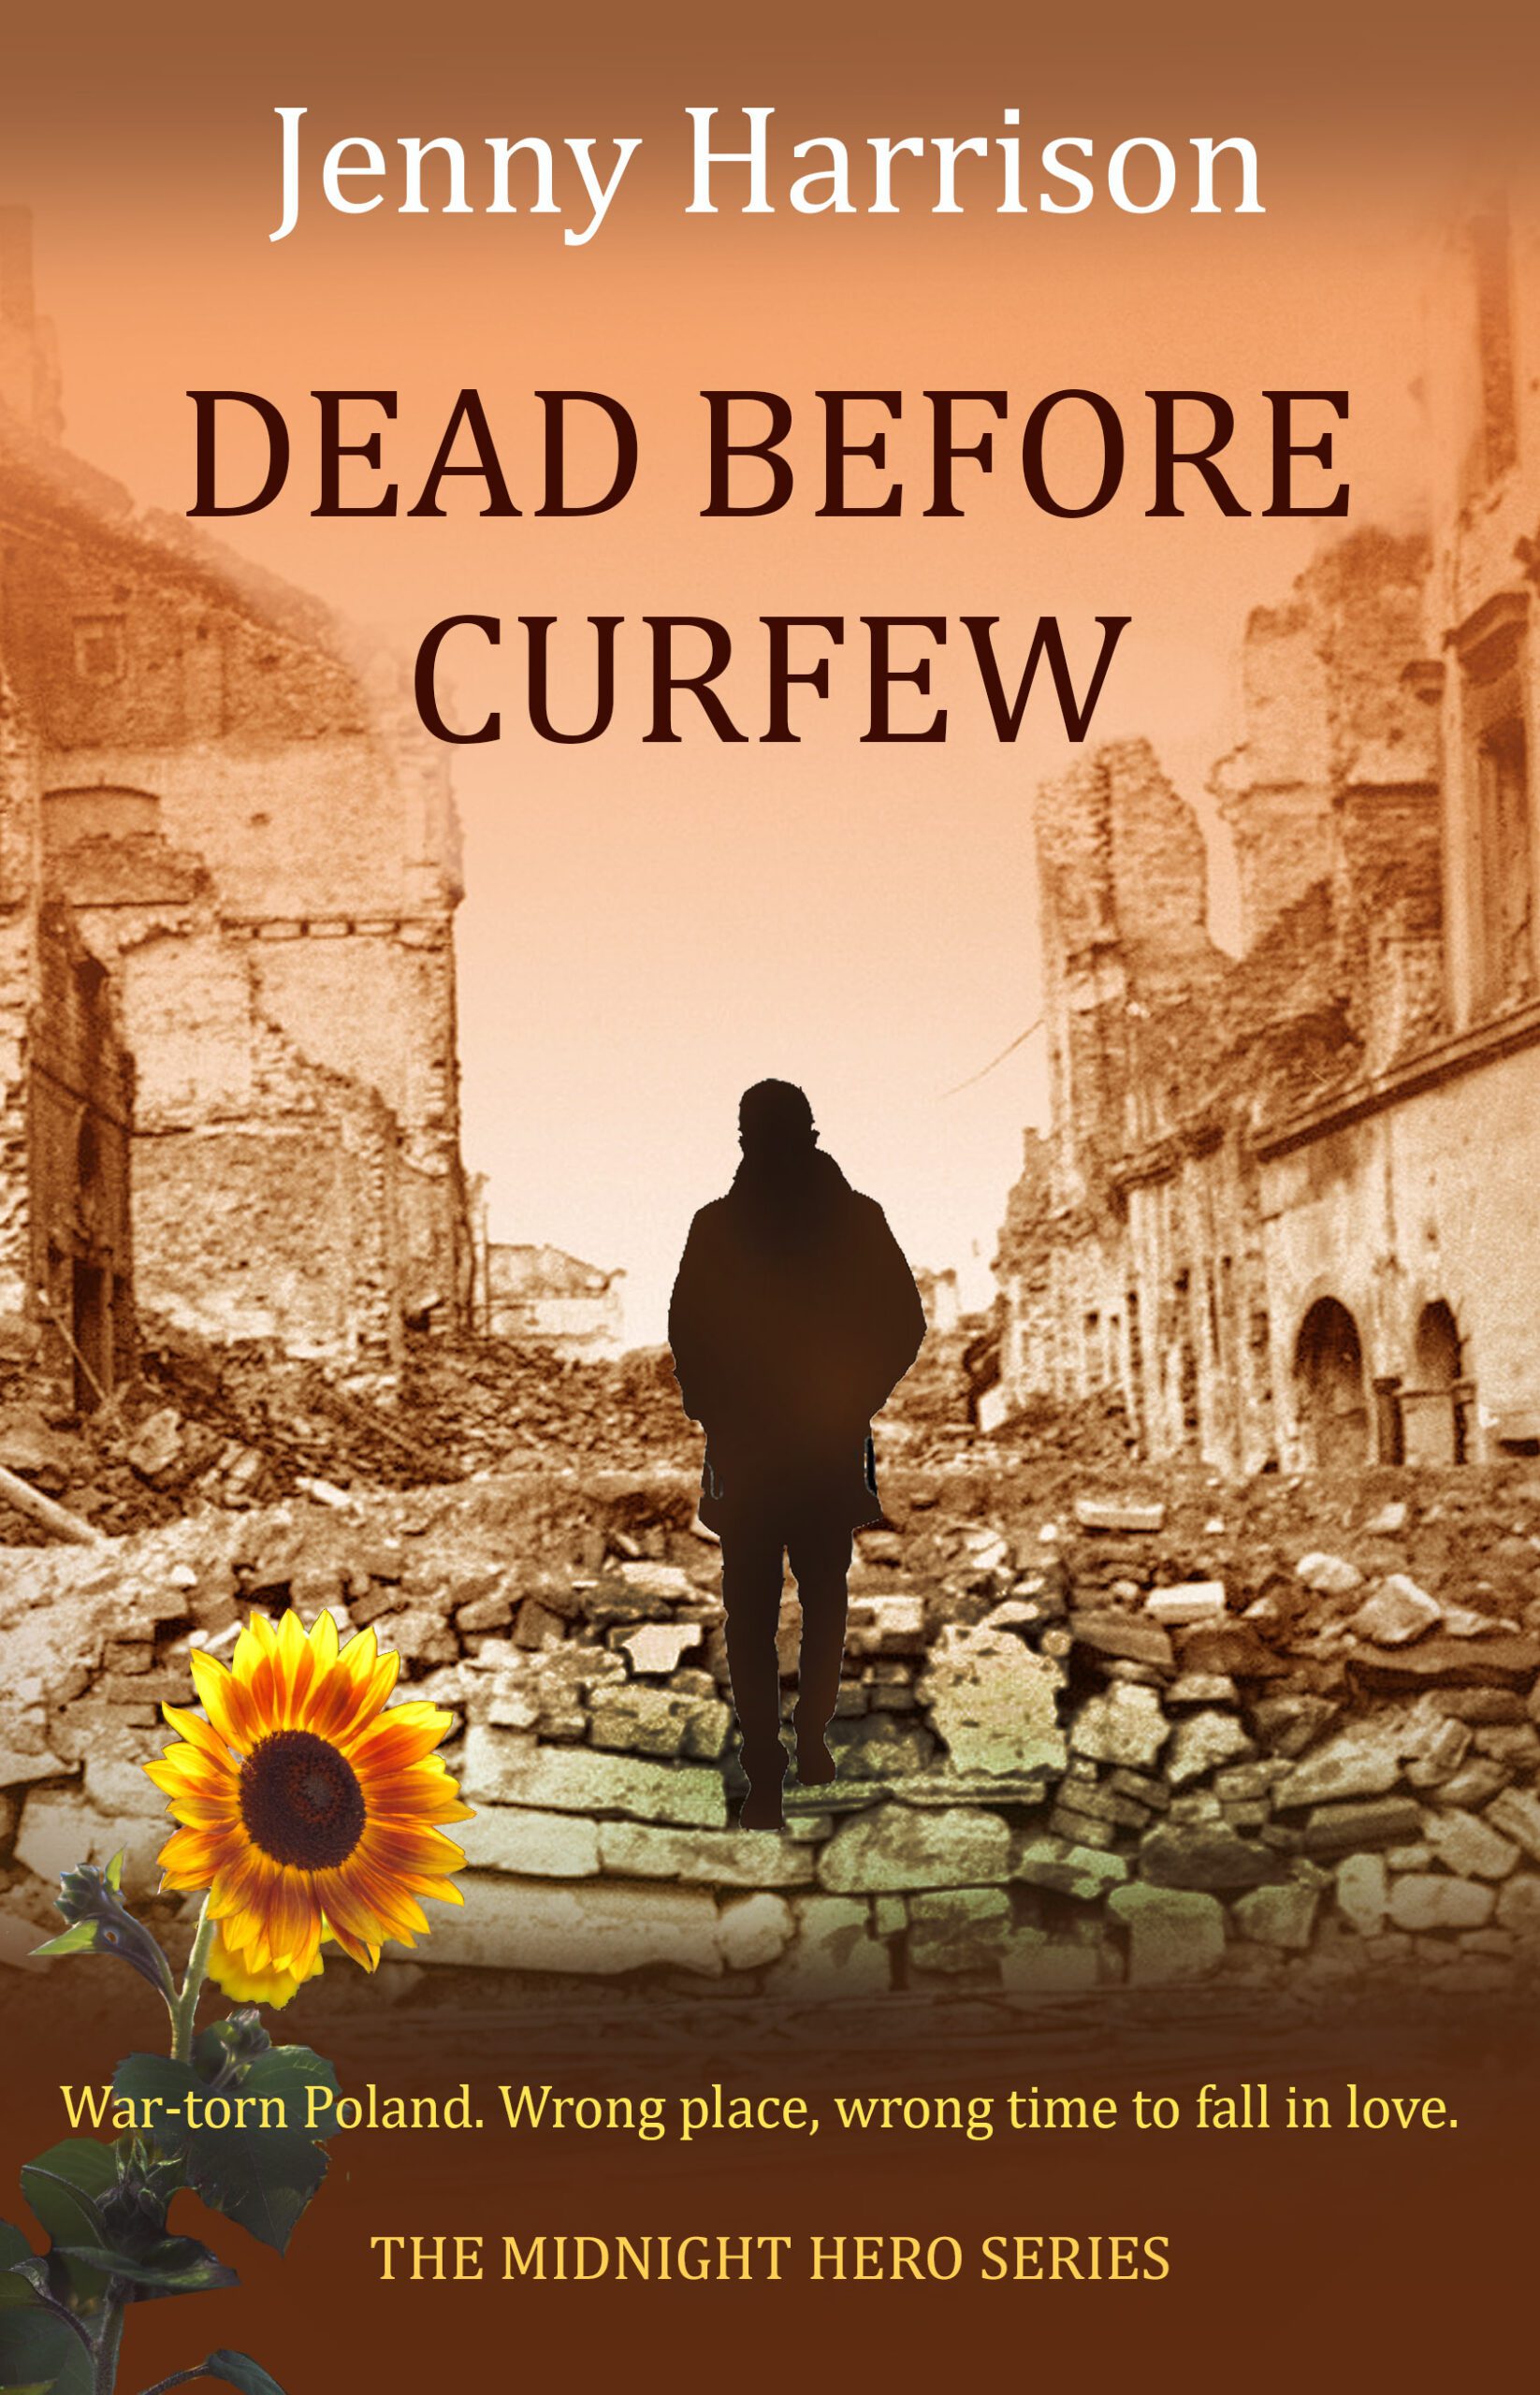 Dead Before Curfew by Jenny Harrison book cover